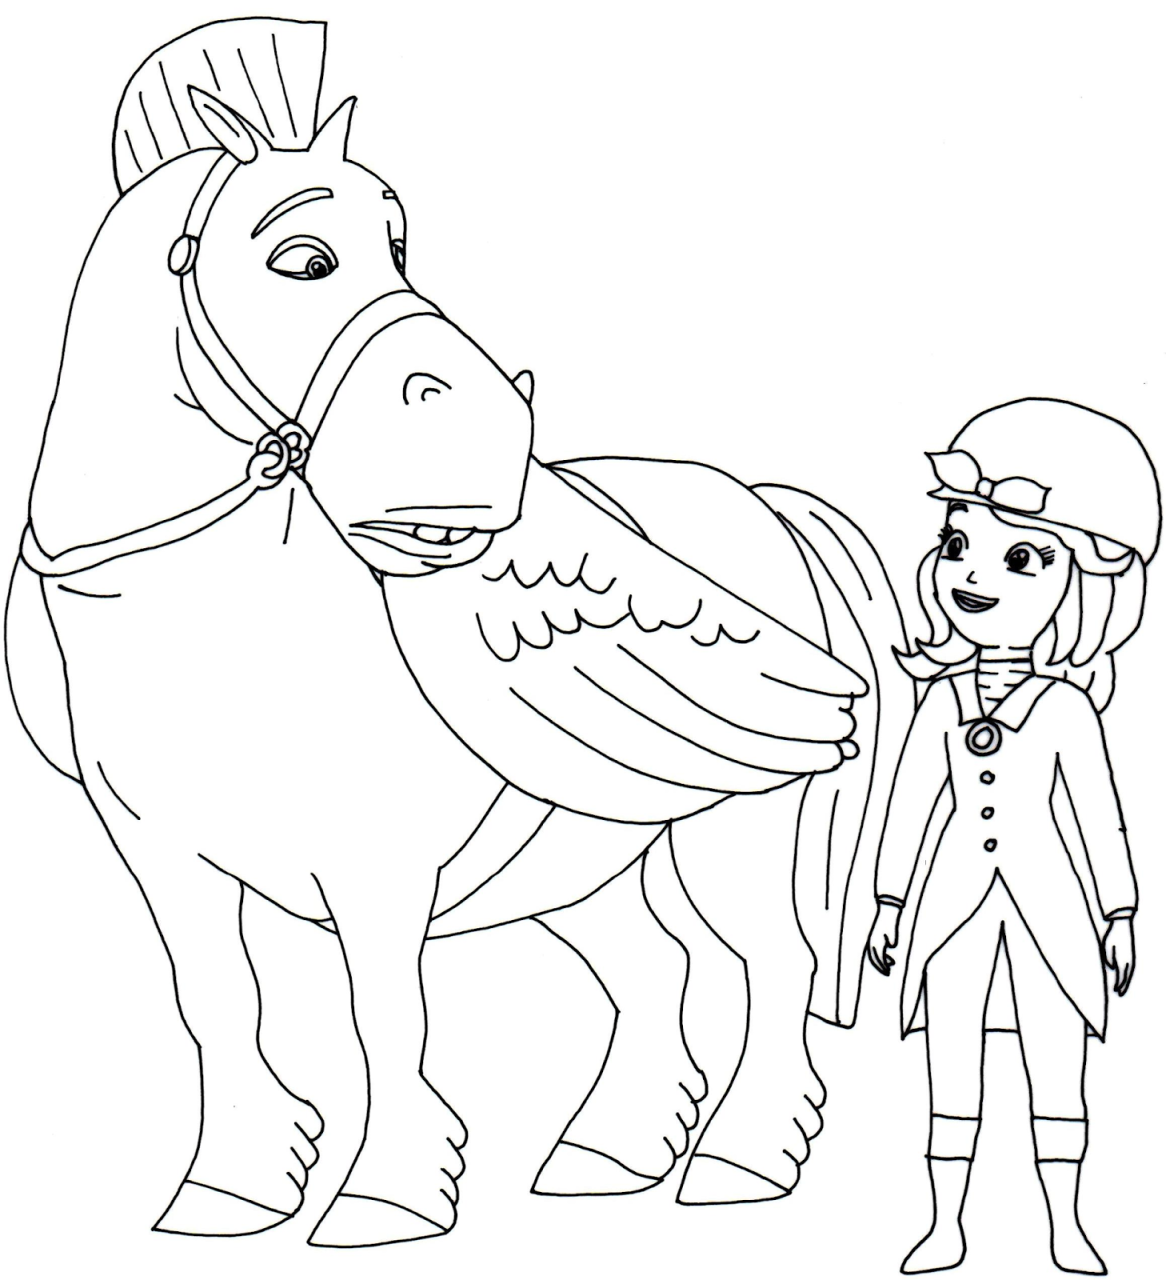 Sofia the First Coloring Pages to Print [] Fresh Coloring Pages